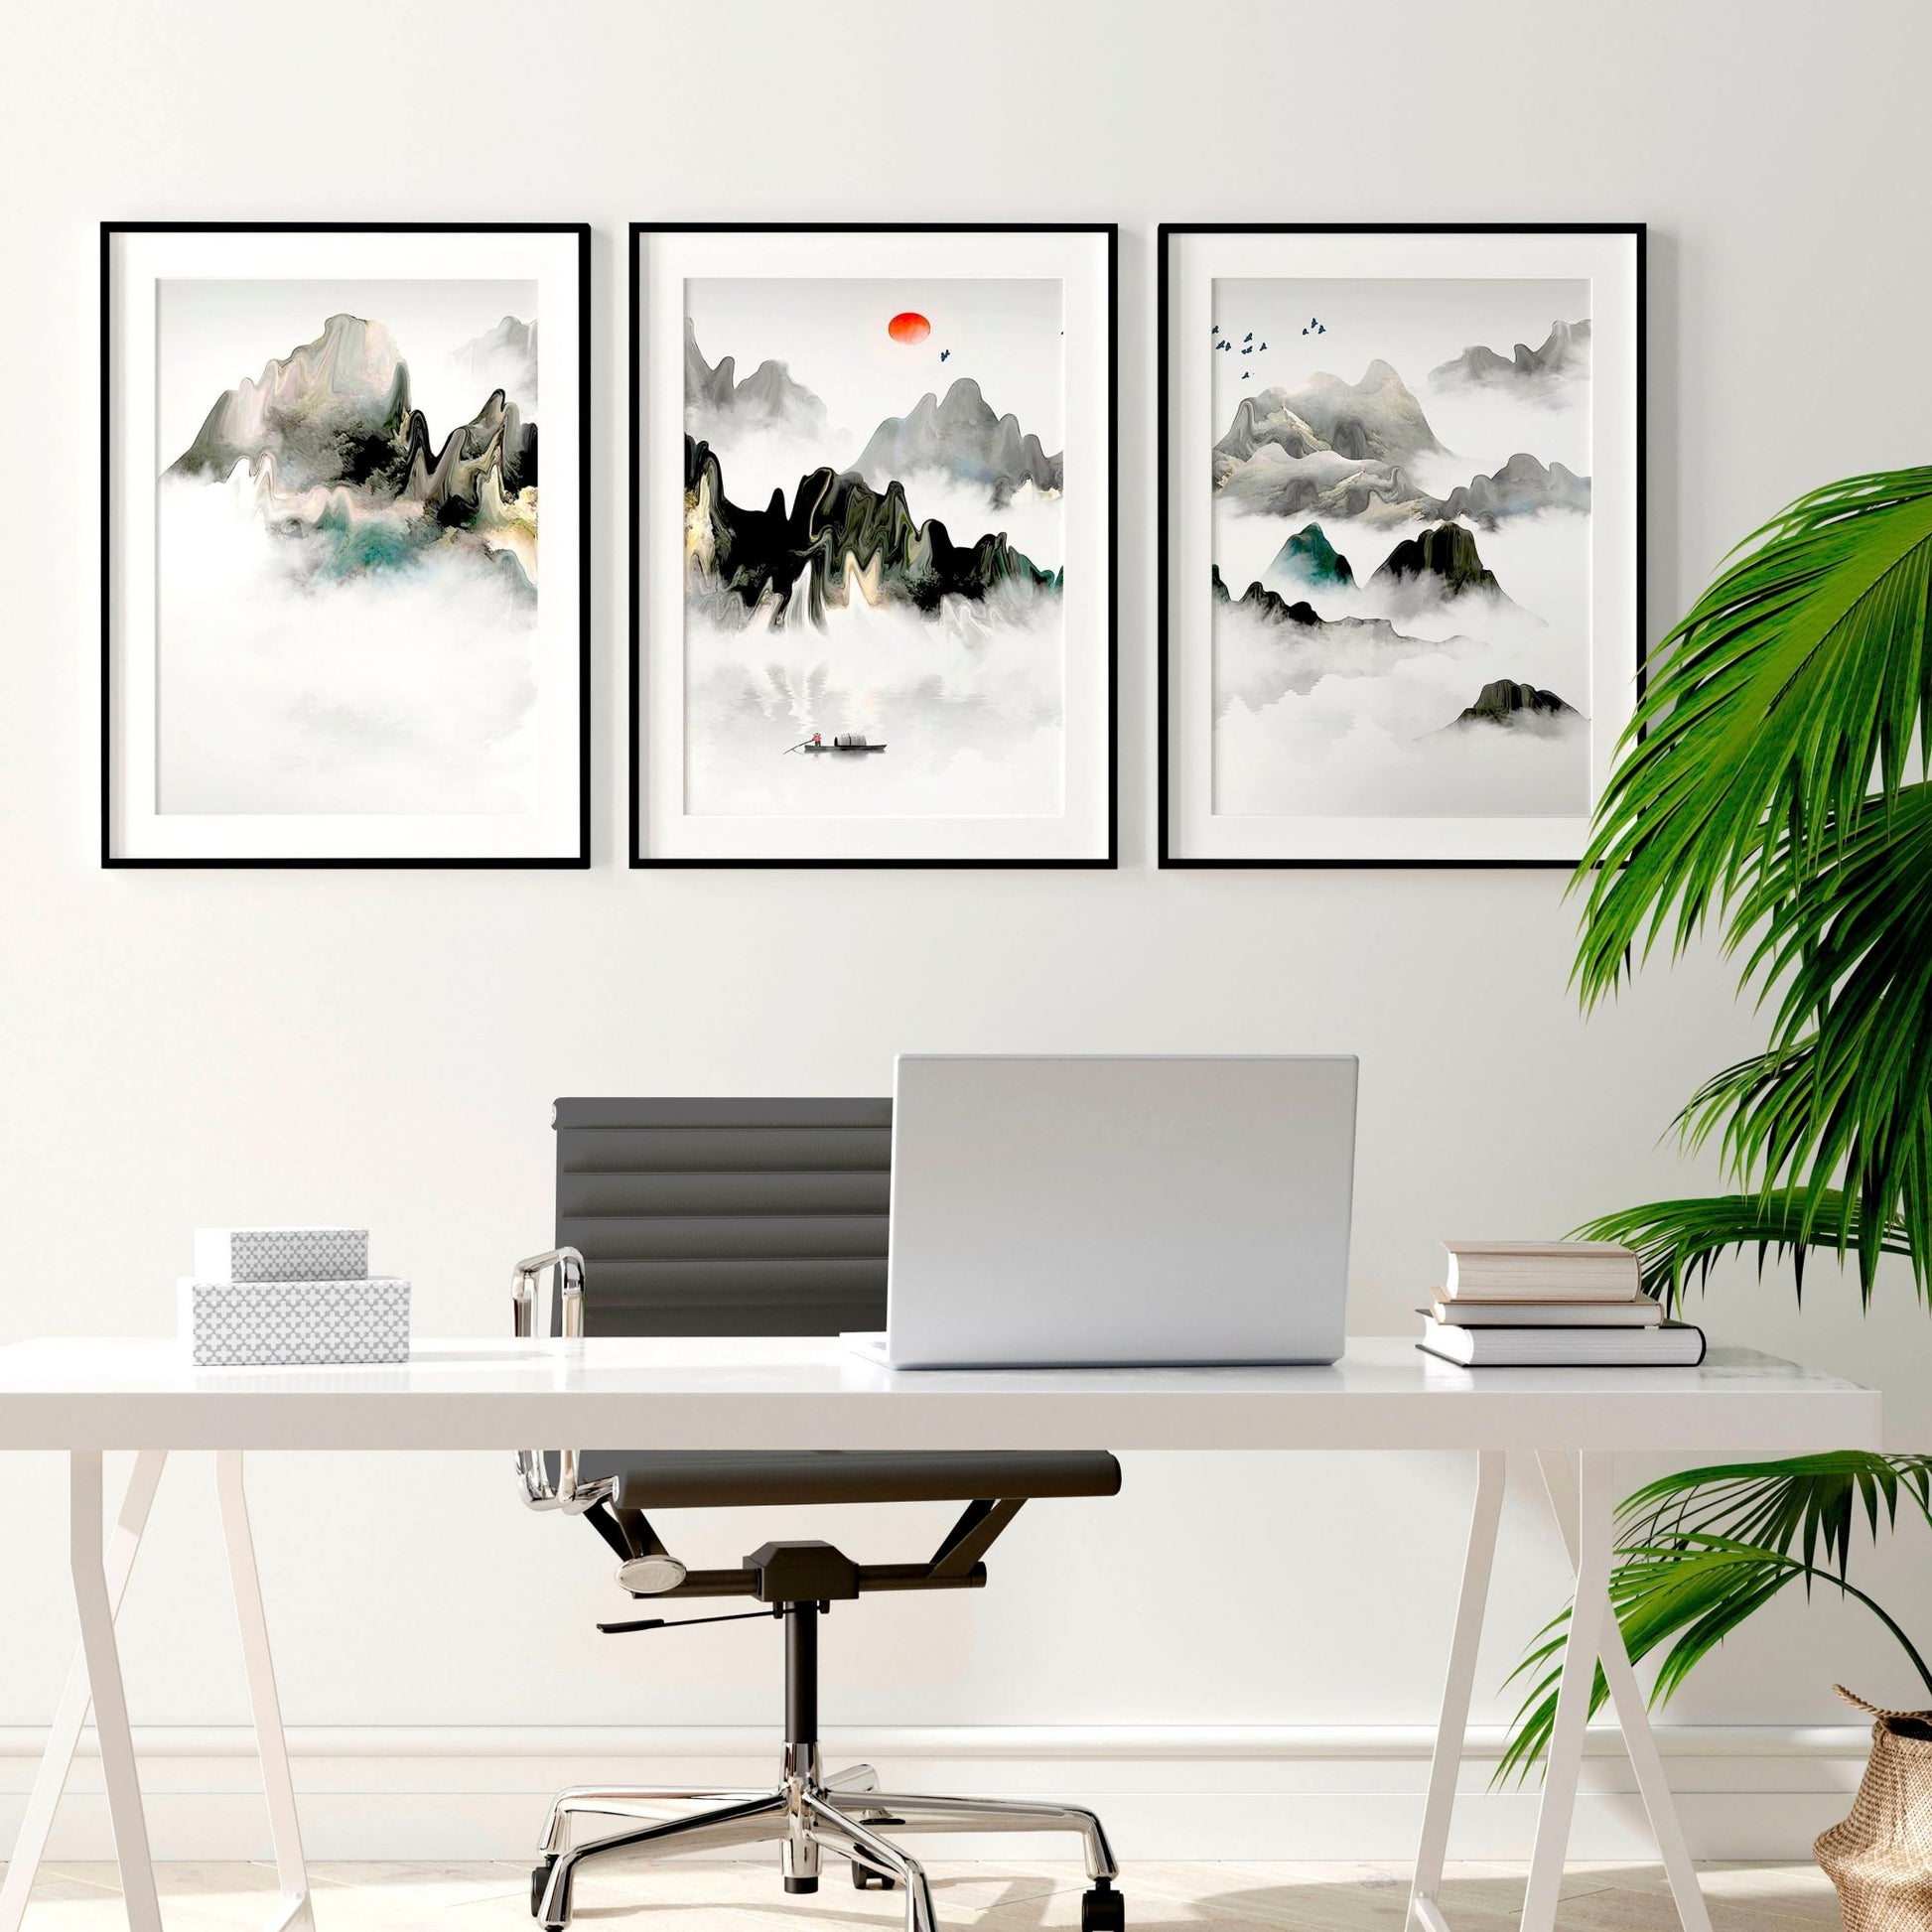 Office decor ideas for work | set of 3 wall art prints